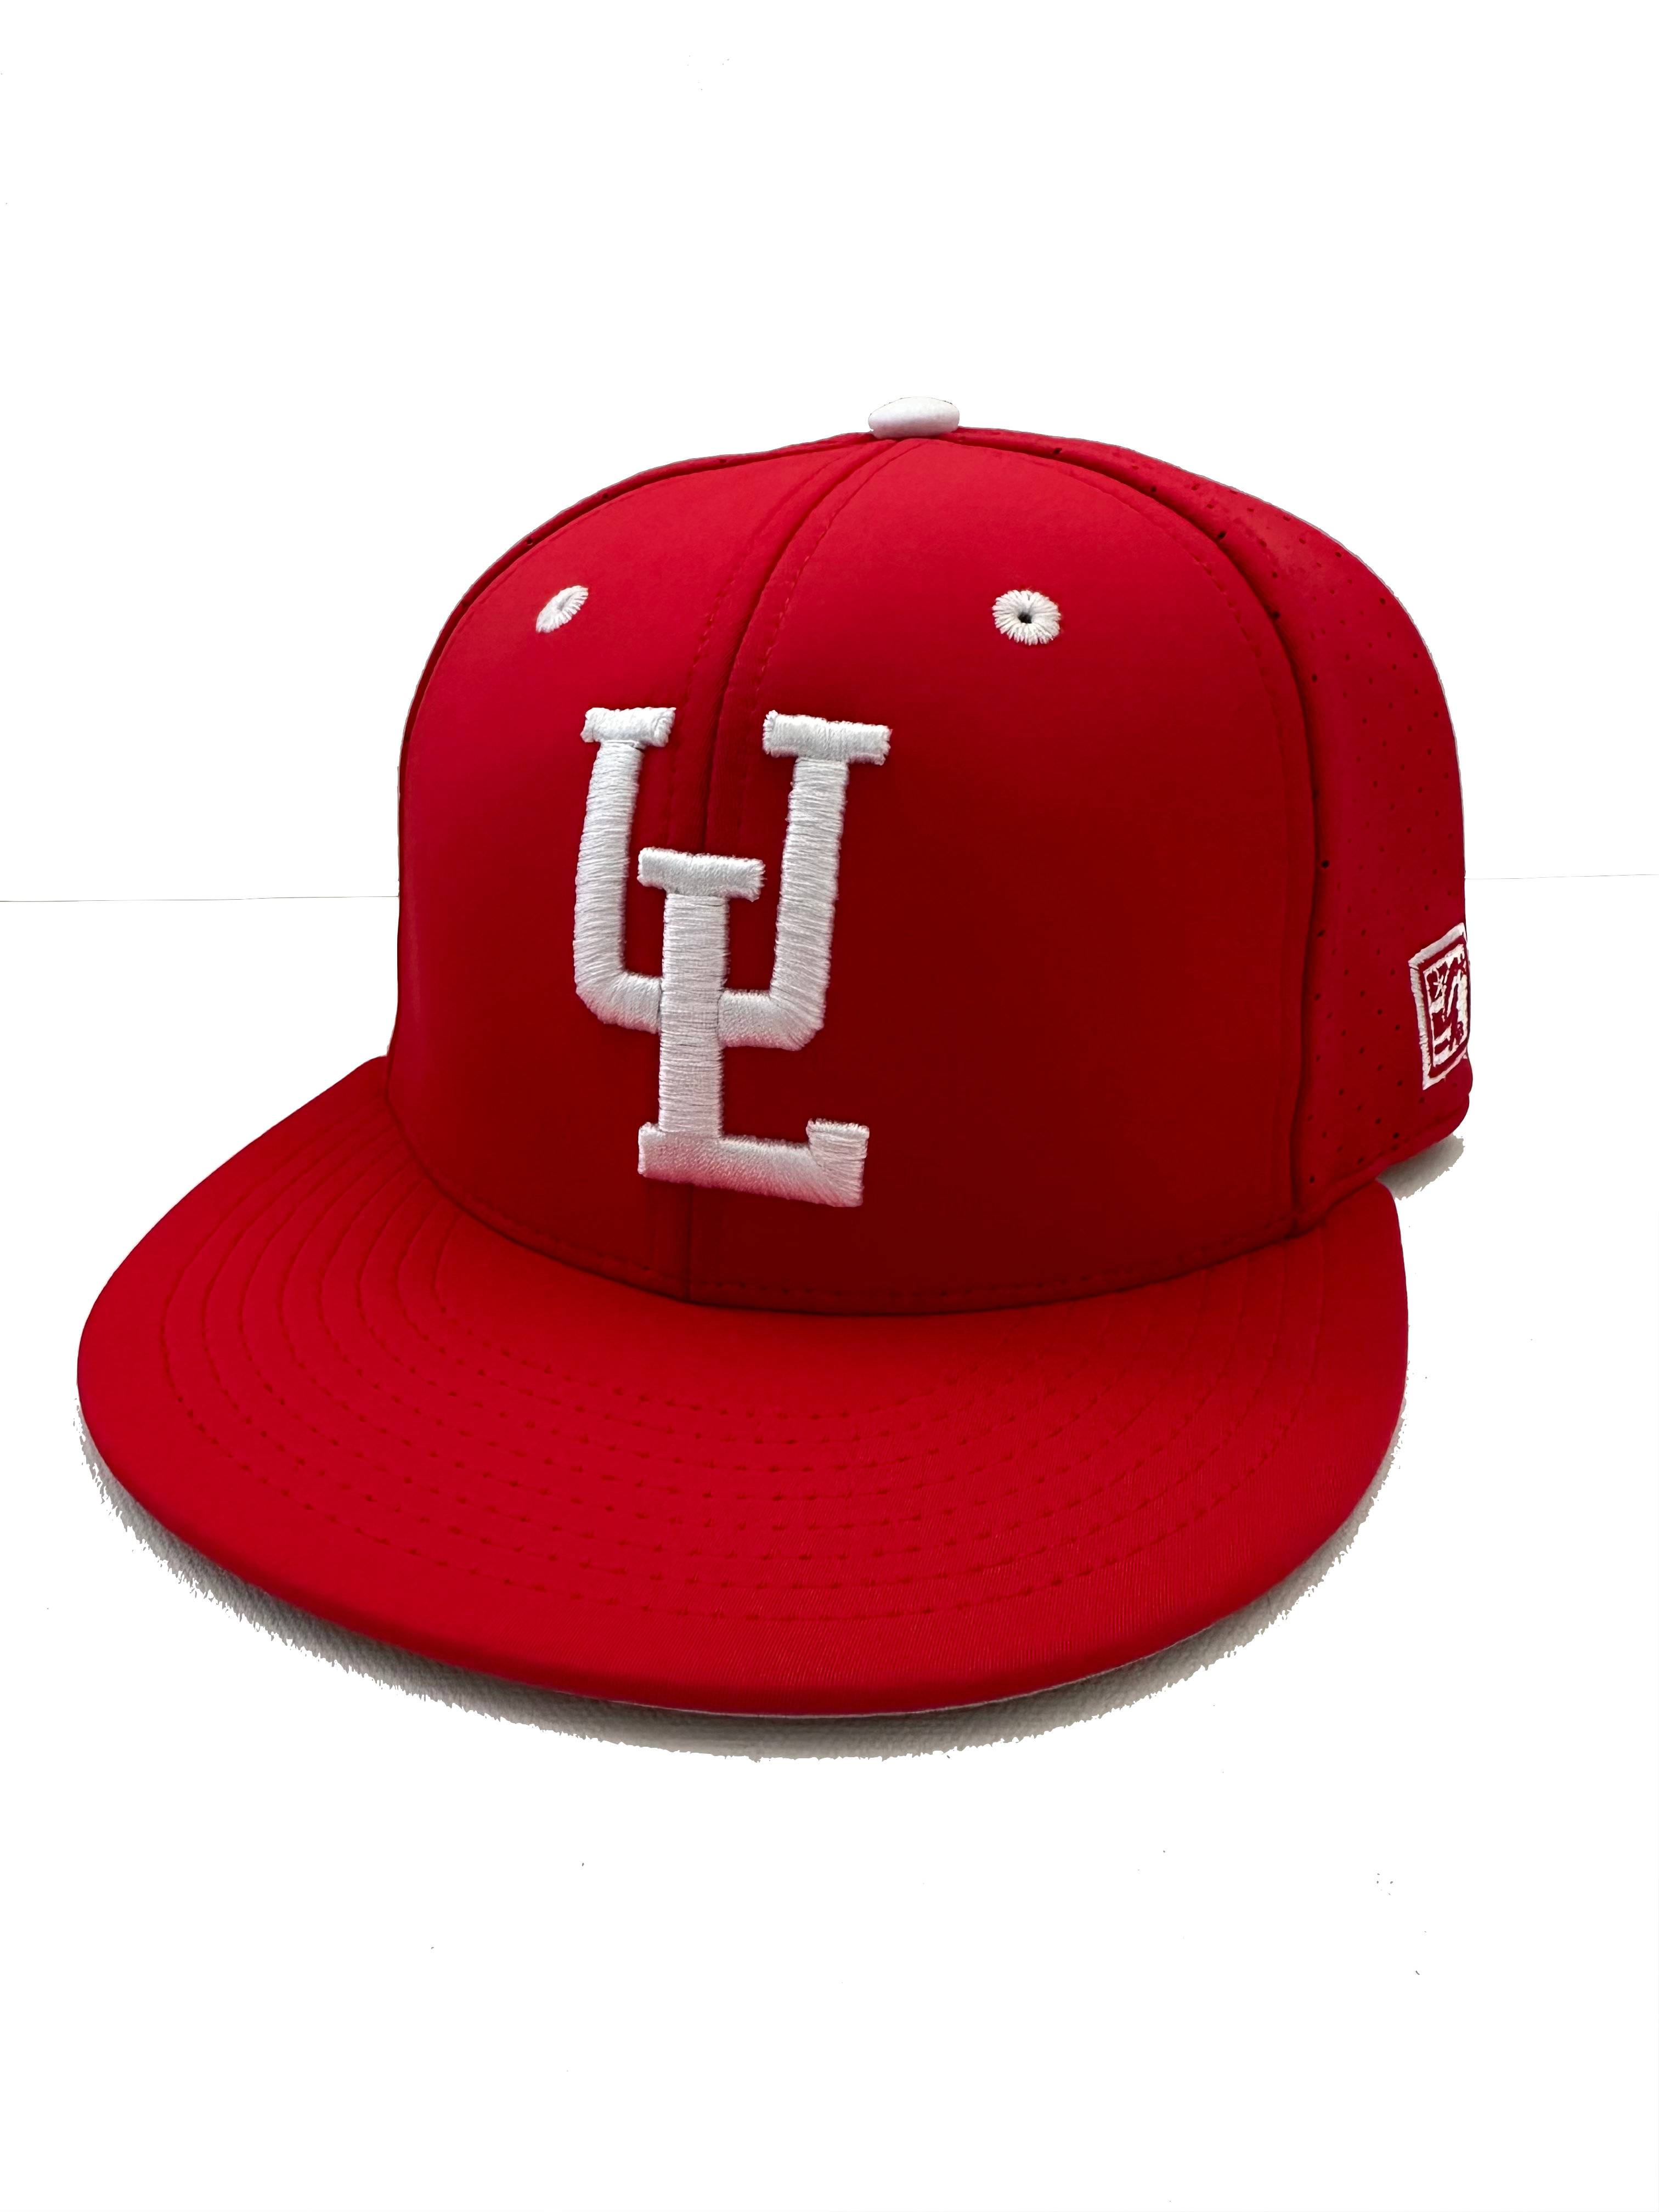 NEW Limited Edition Red UL GameChanger Flat Bill Cap